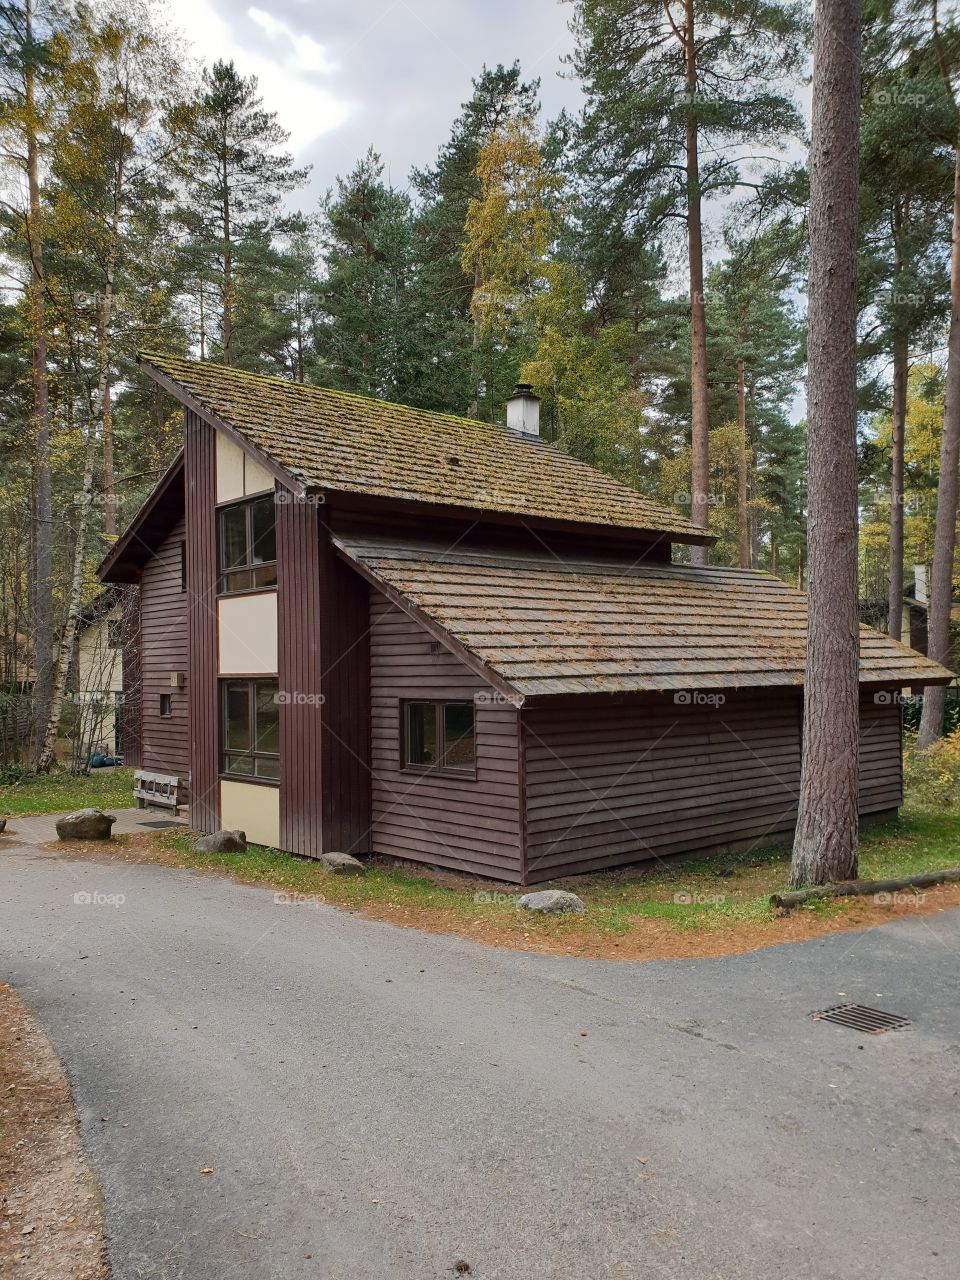 Log Cabin, Centre Parcs, Whinfell Forest, UK